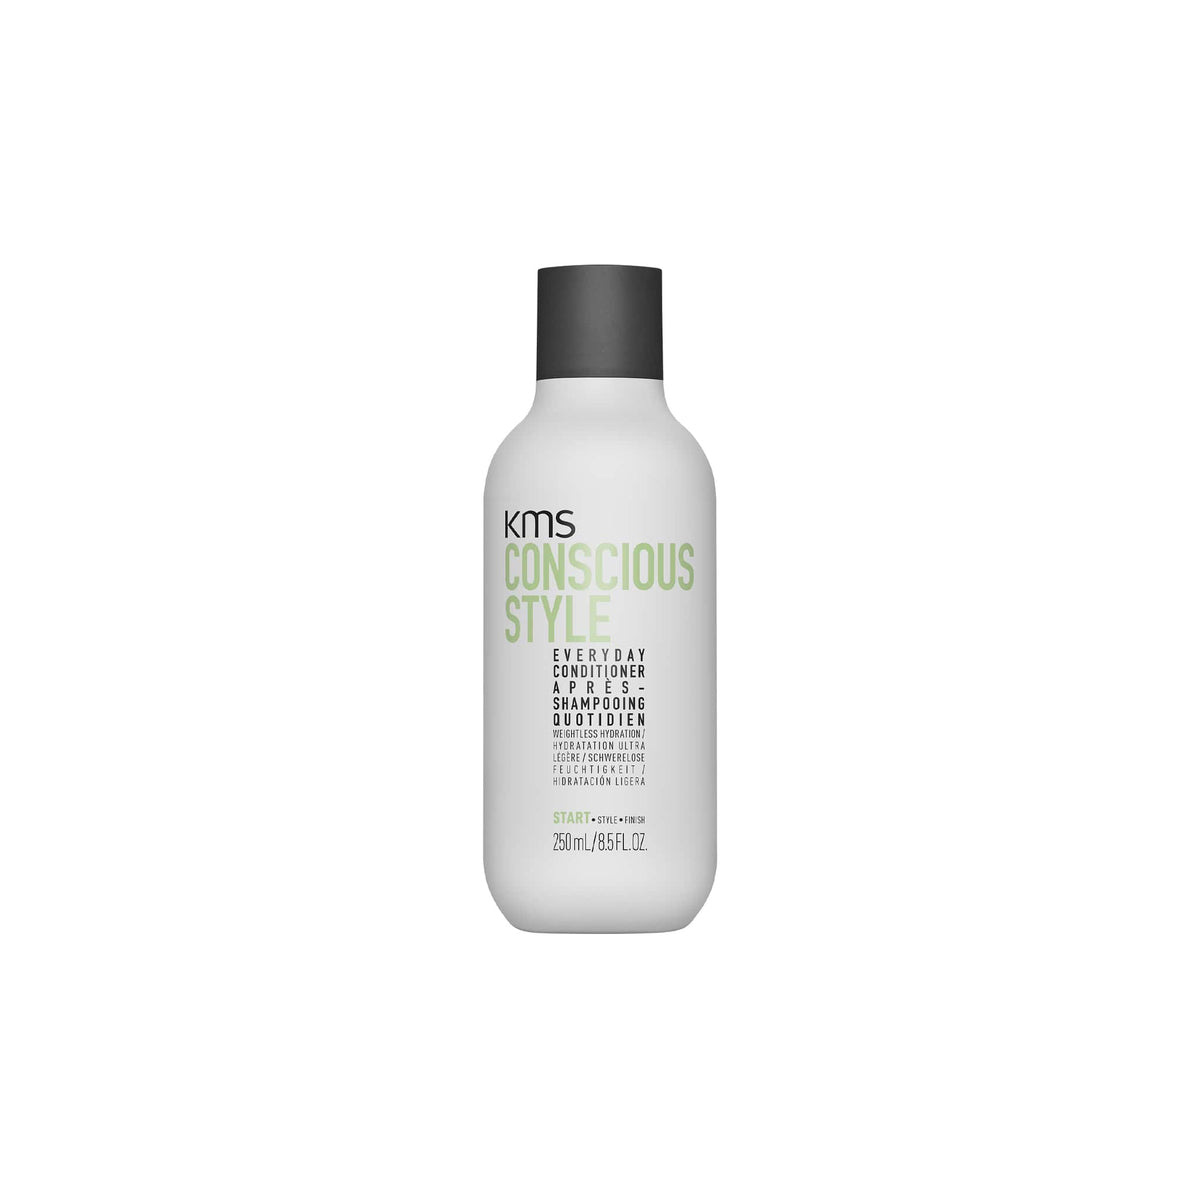 Kms California Conscious Style Everyday Conditioner | Retail Box